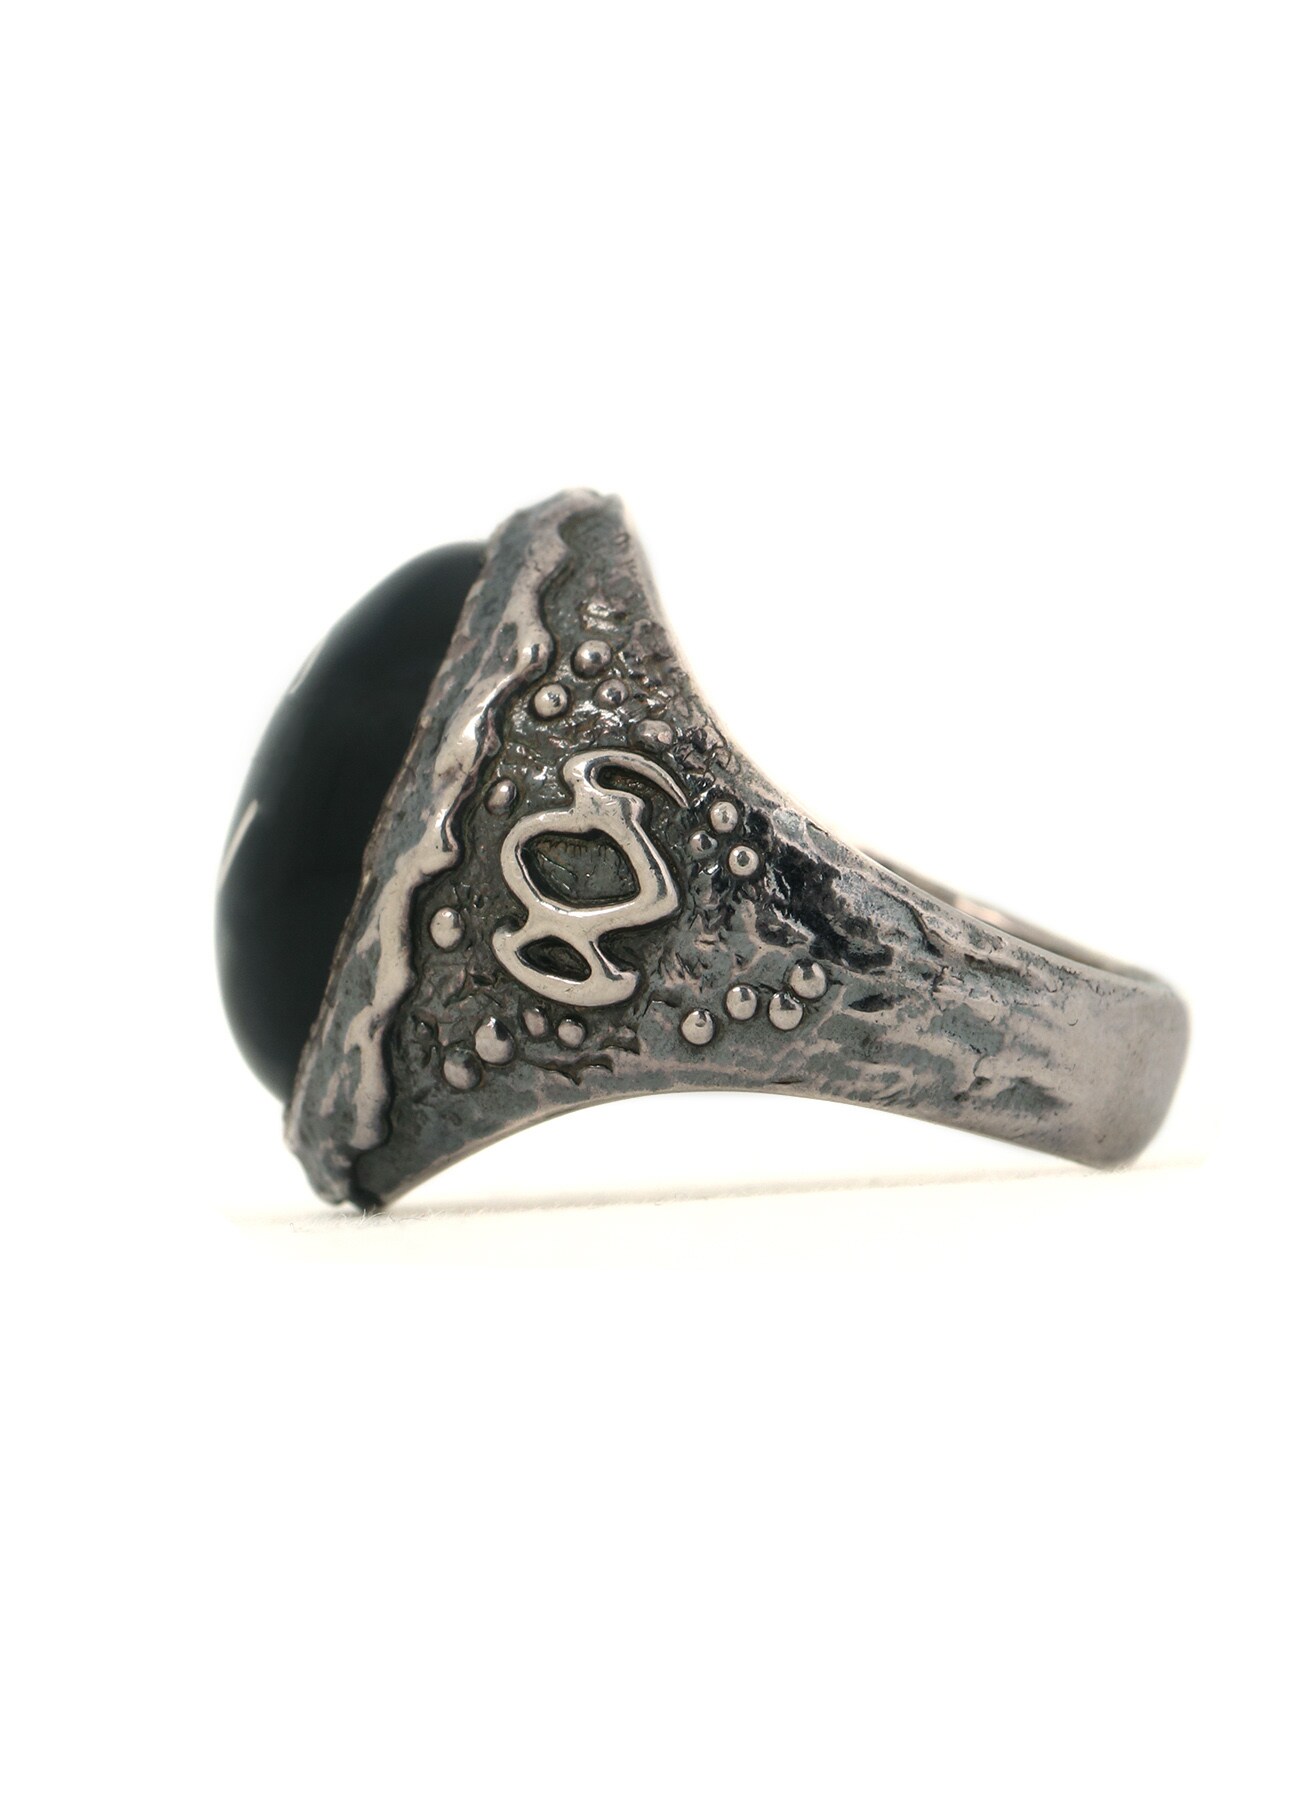 SILVER 950 GOTHIC OVAL RING